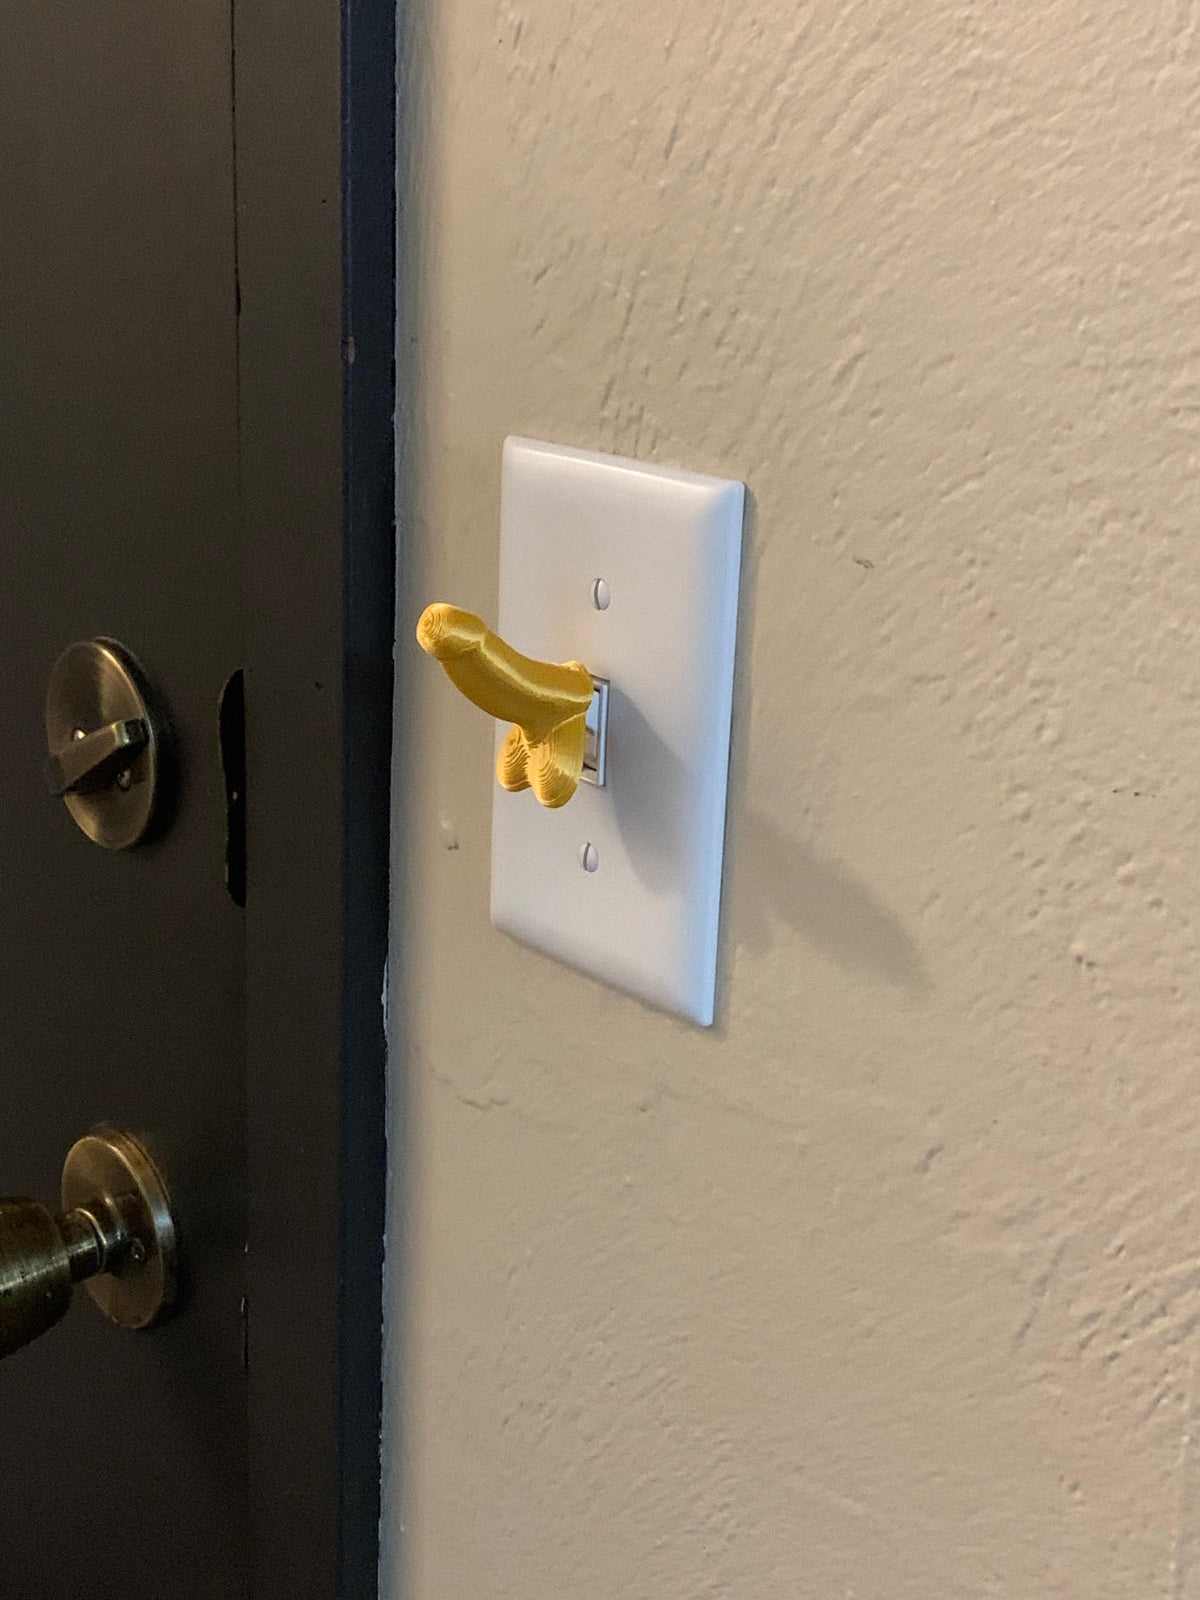 The Dick Light Switch!